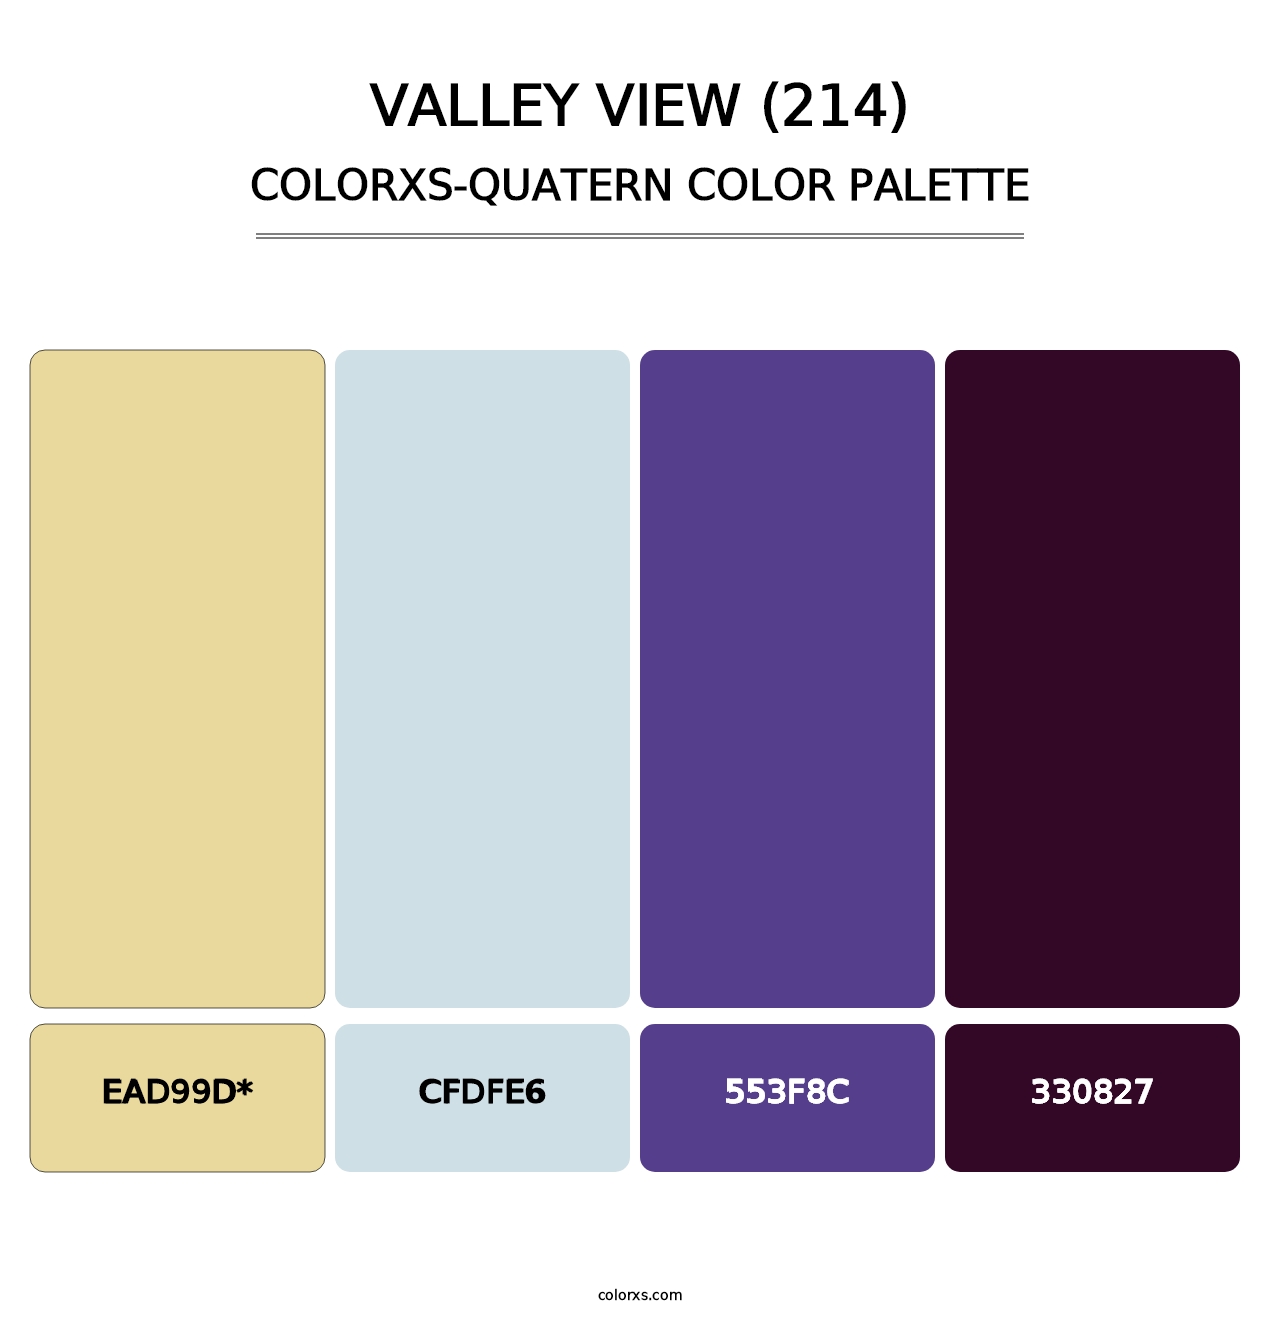 Valley View (214) - Colorxs Quatern Palette